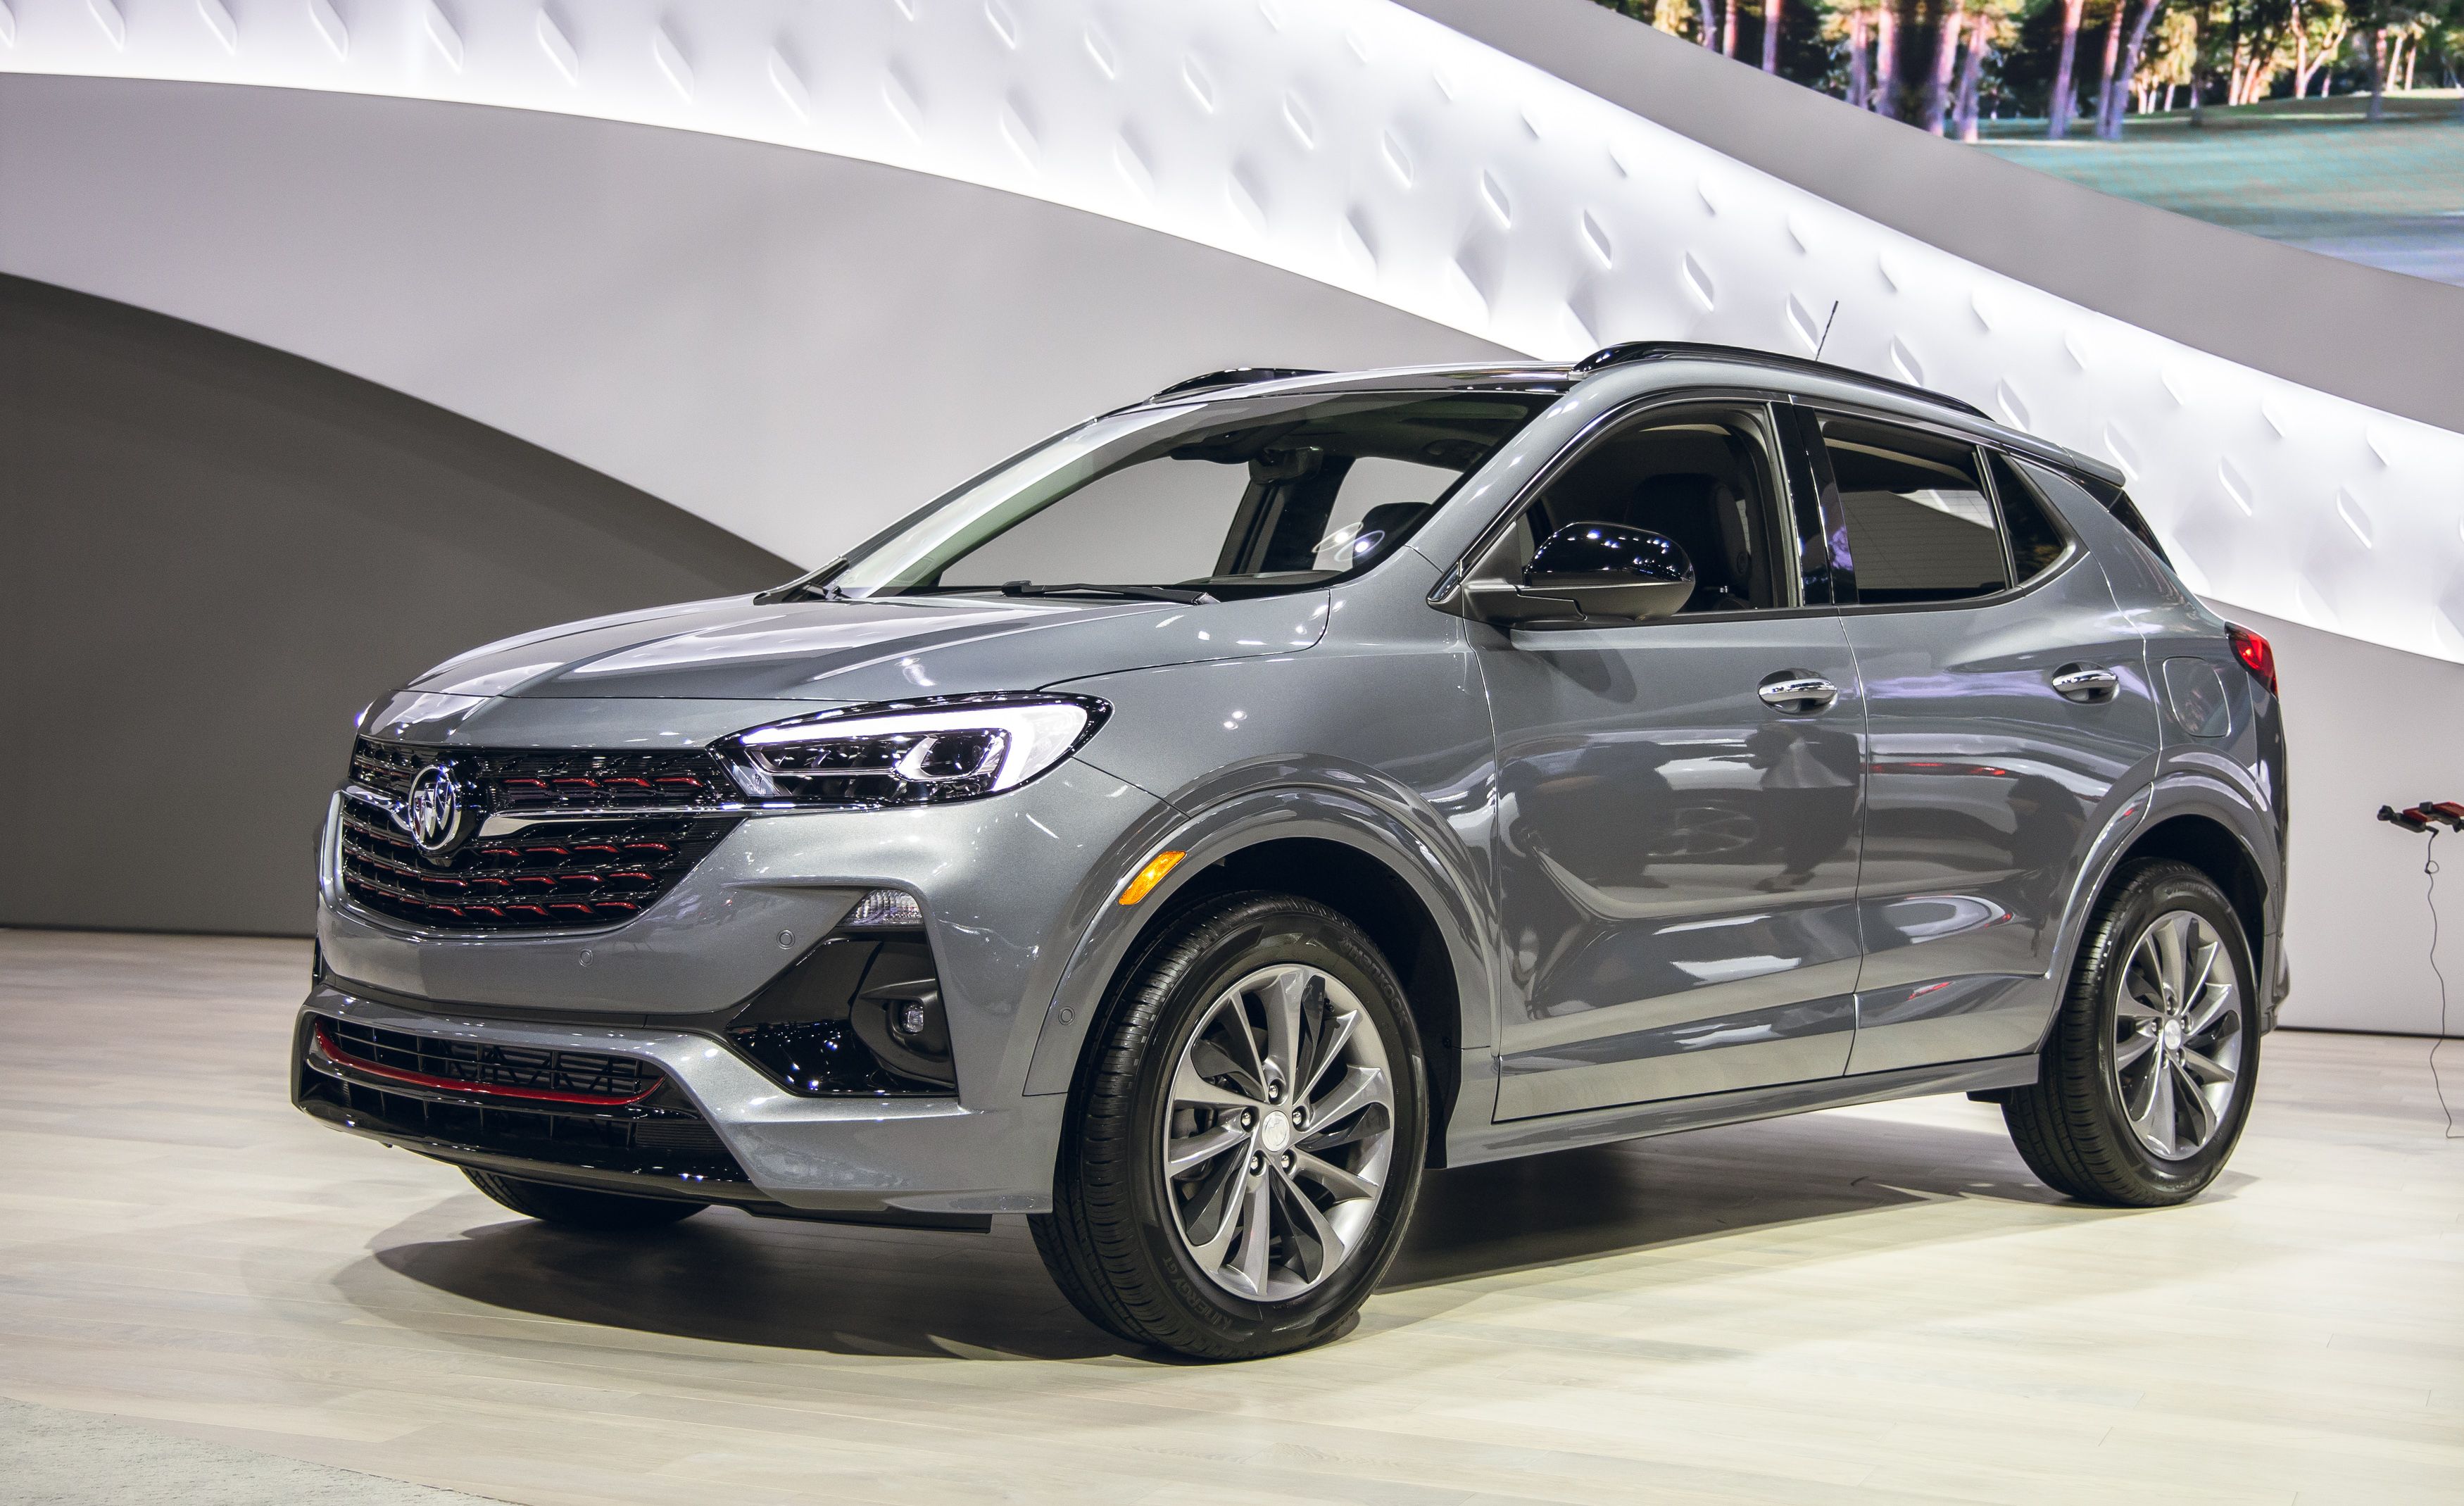 Comments on: Buick Reveals More Details of 2020 Encore GX - Car and